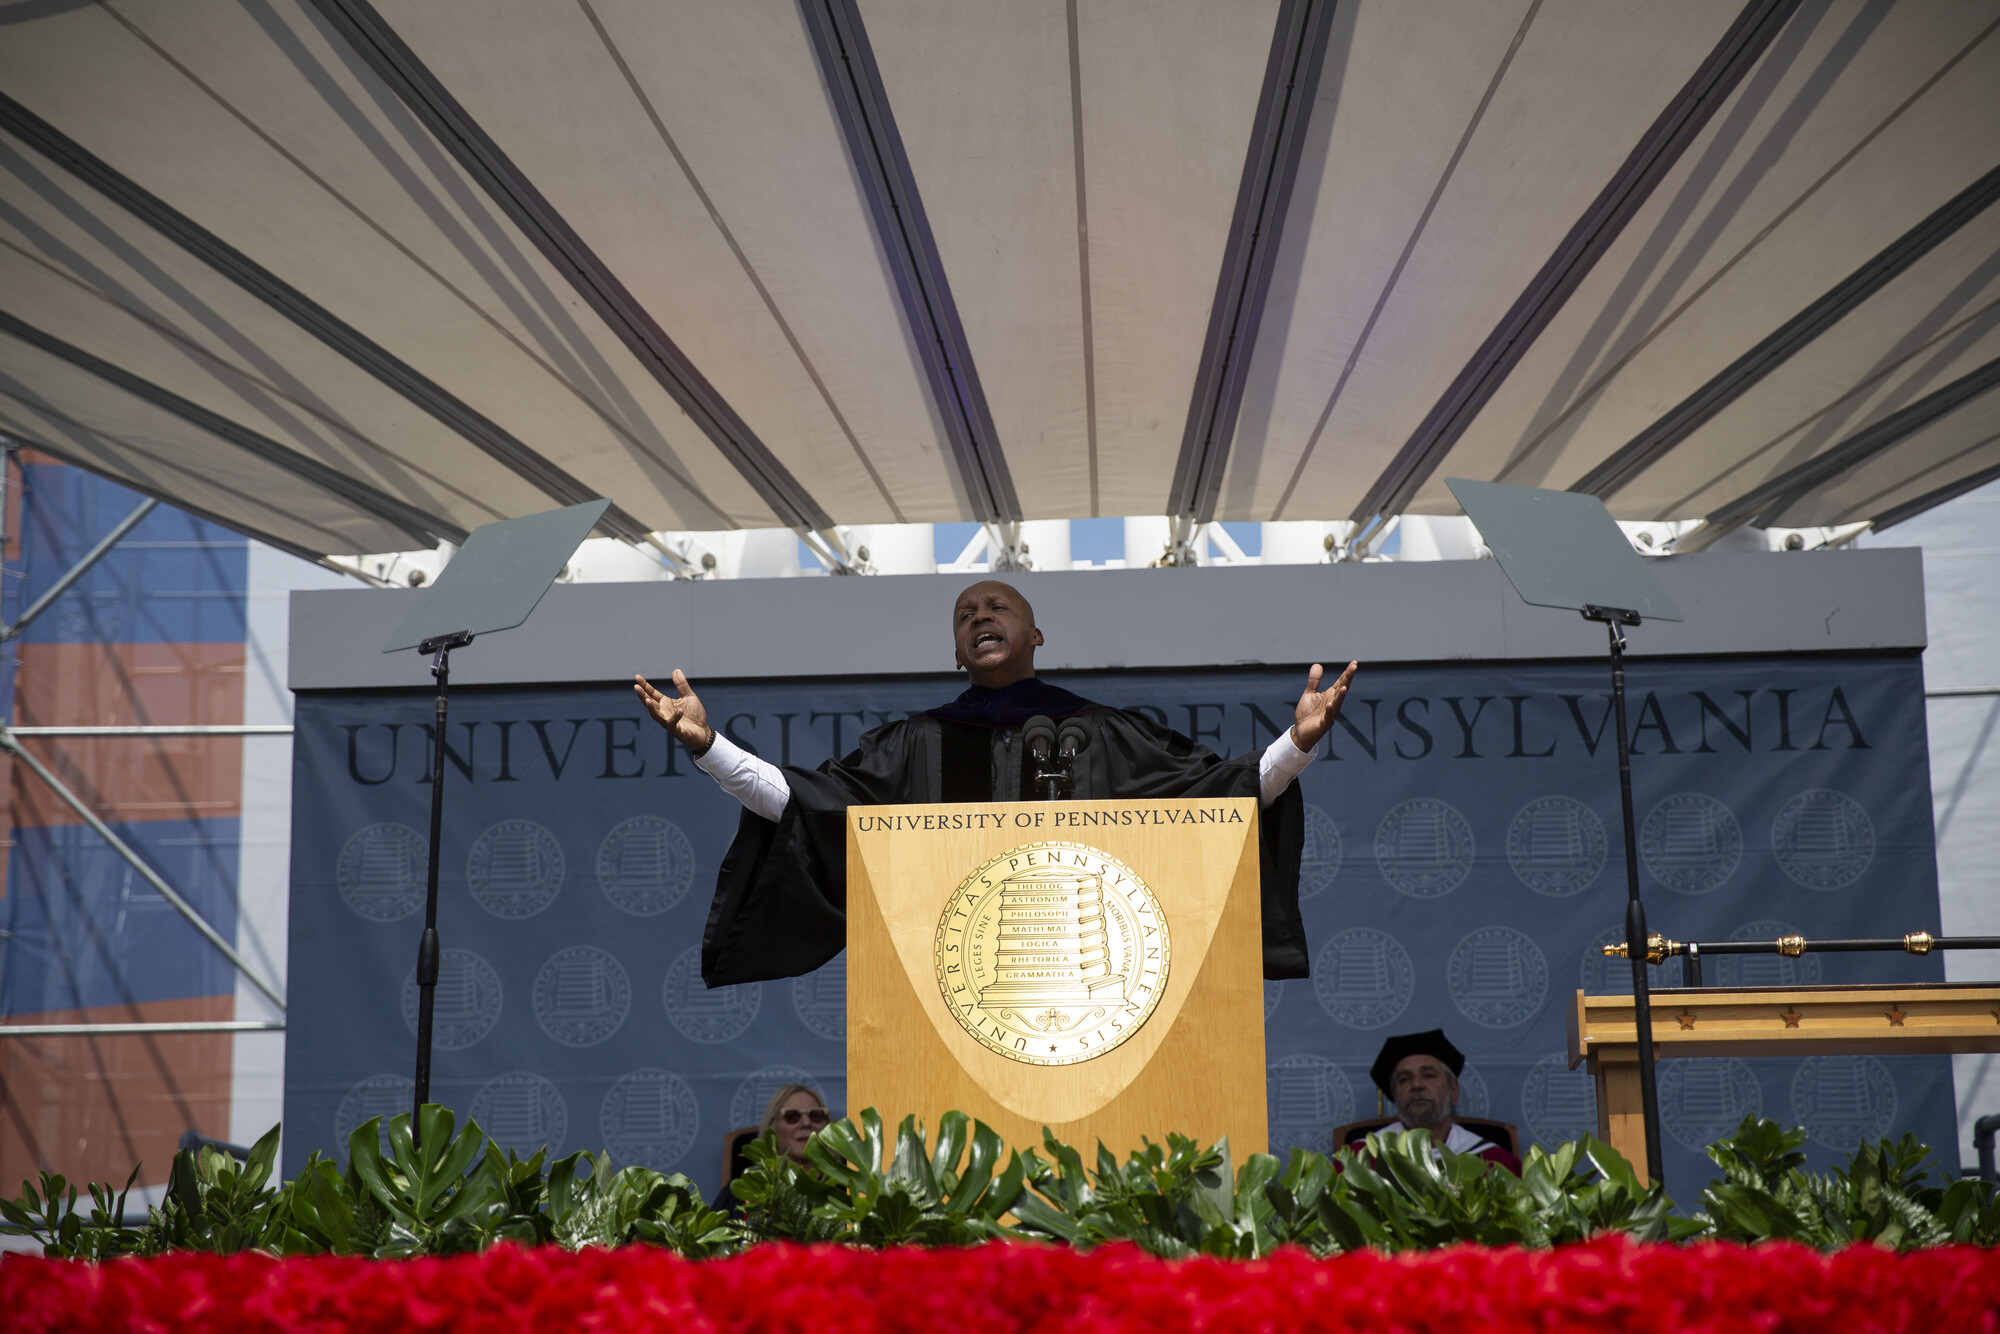 Bryan Stevenson reaches his arms out wide while speaking at a podium on stage at commencement.